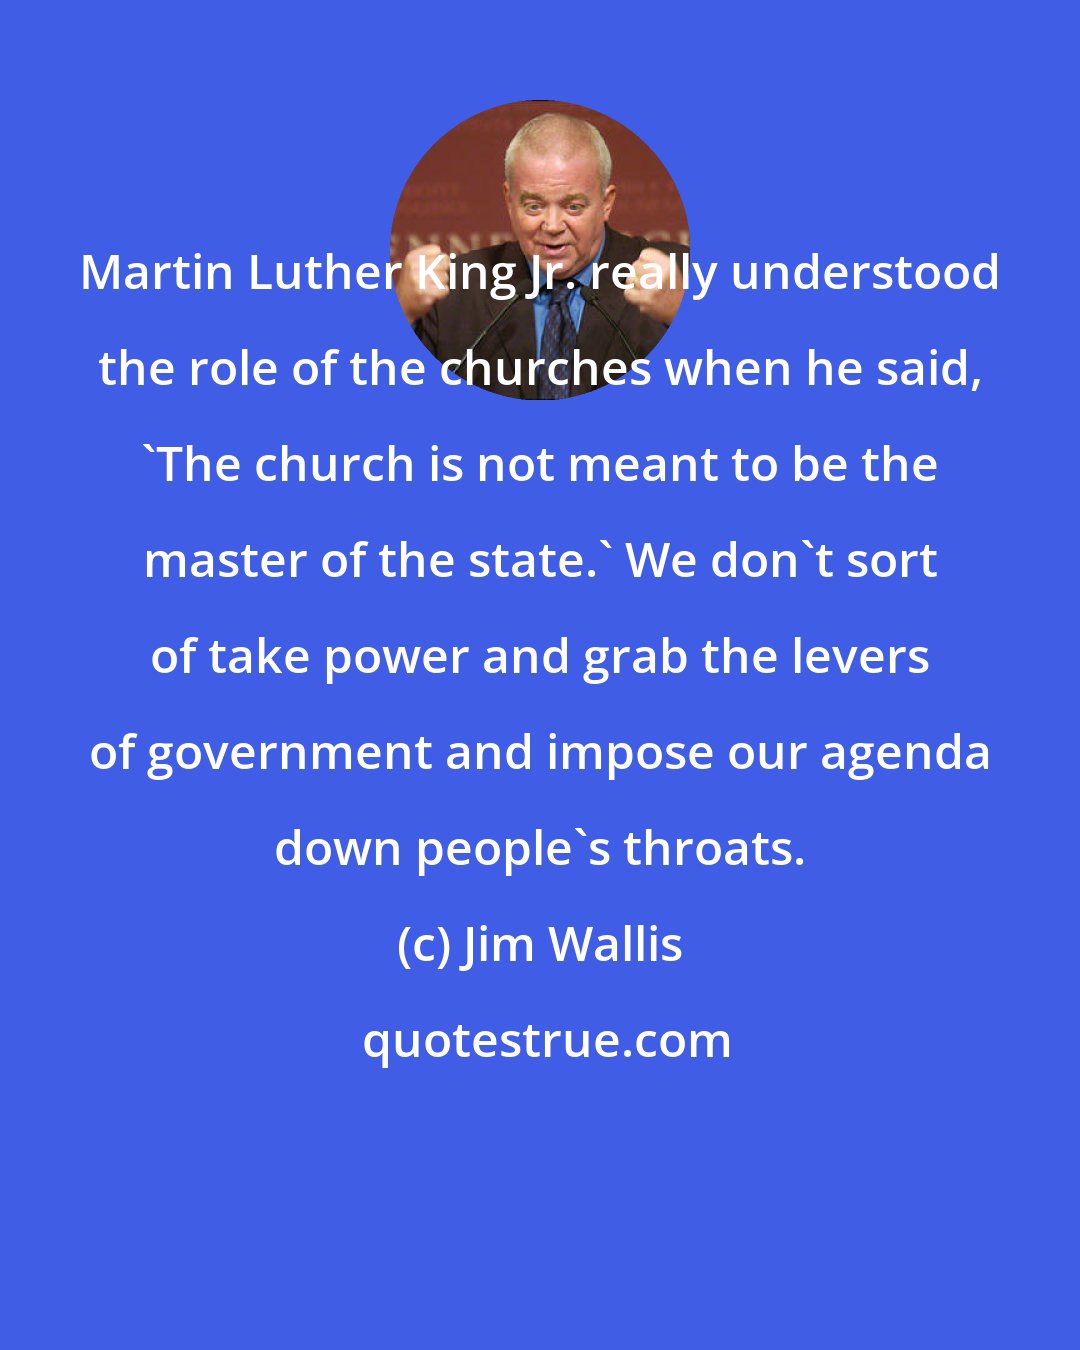 Jim Wallis: Martin Luther King Jr. really understood the role of the churches when he said, 'The church is not meant to be the master of the state.' We don't sort of take power and grab the levers of government and impose our agenda down people's throats.